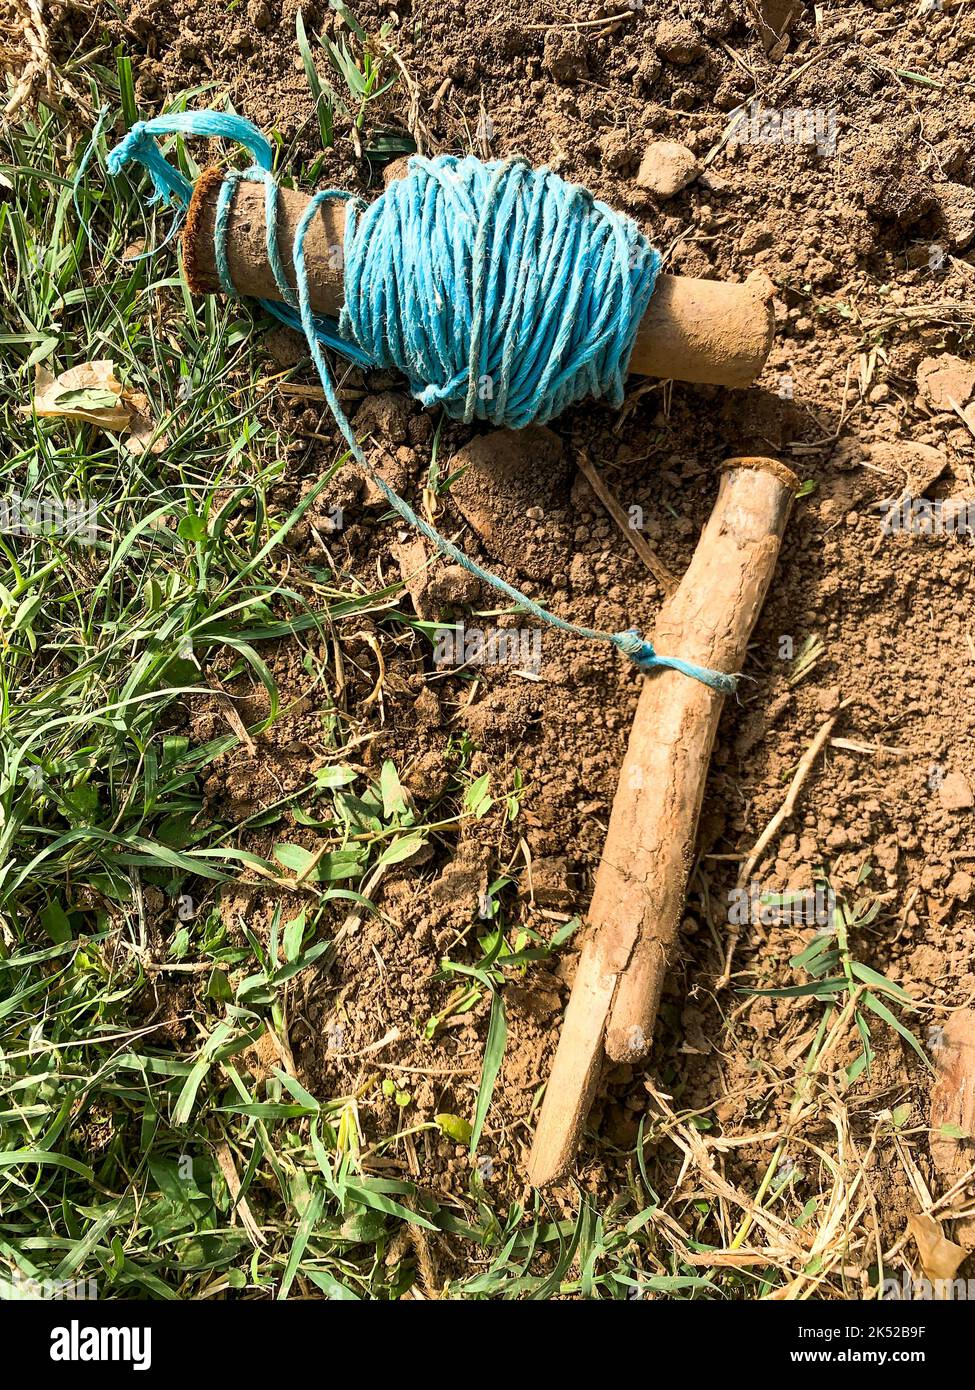 Vegetable cultivation, sowing tools, Saint-Priest, Rhone, AURA Region, France Stock Photo